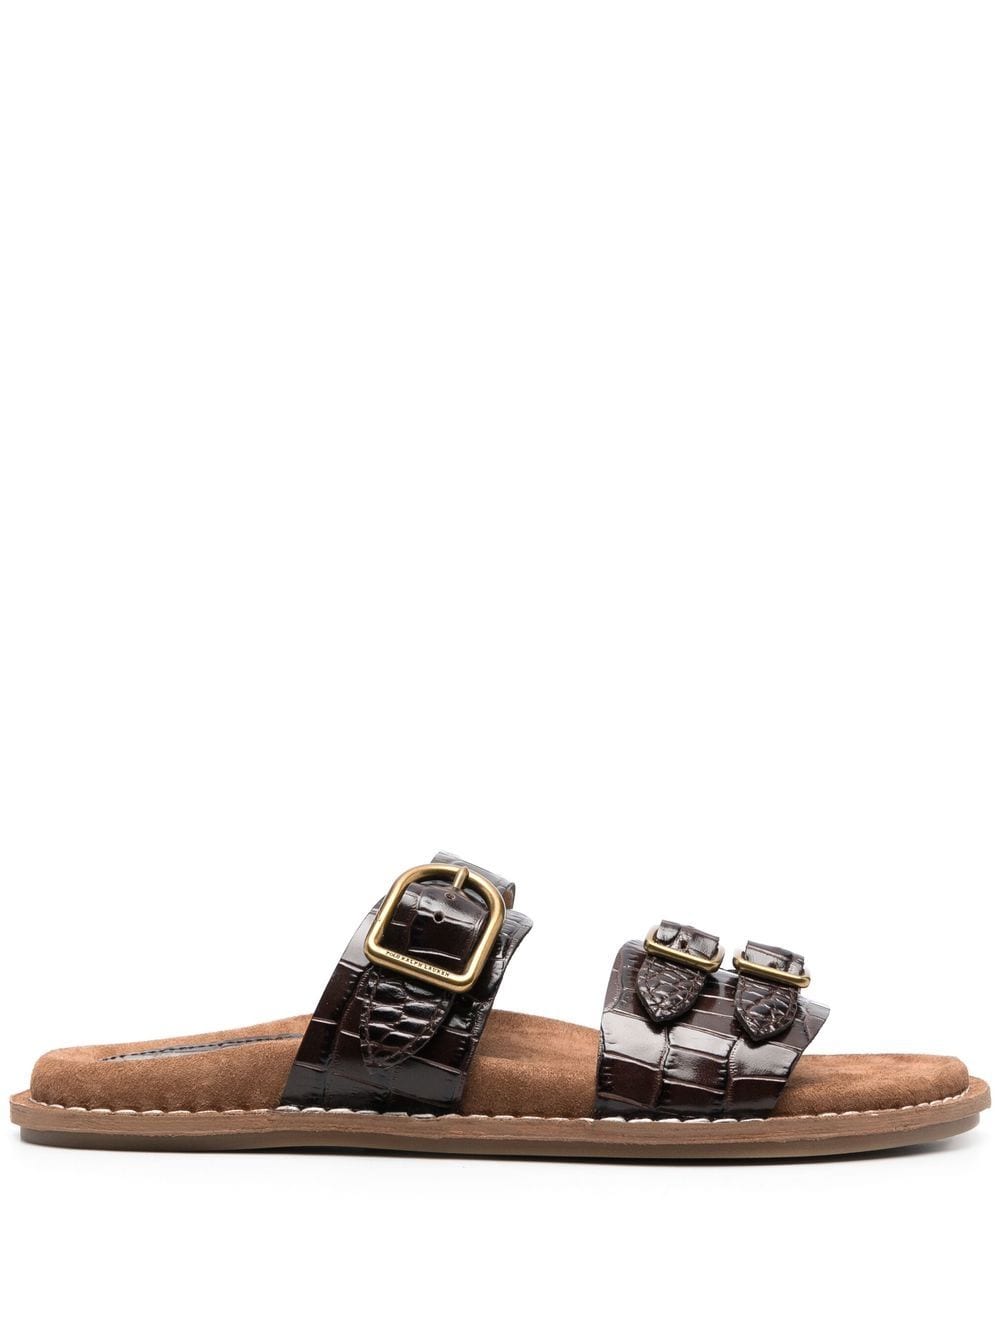 Image 1 of Polo Ralph Lauren croco-effect strappy slides